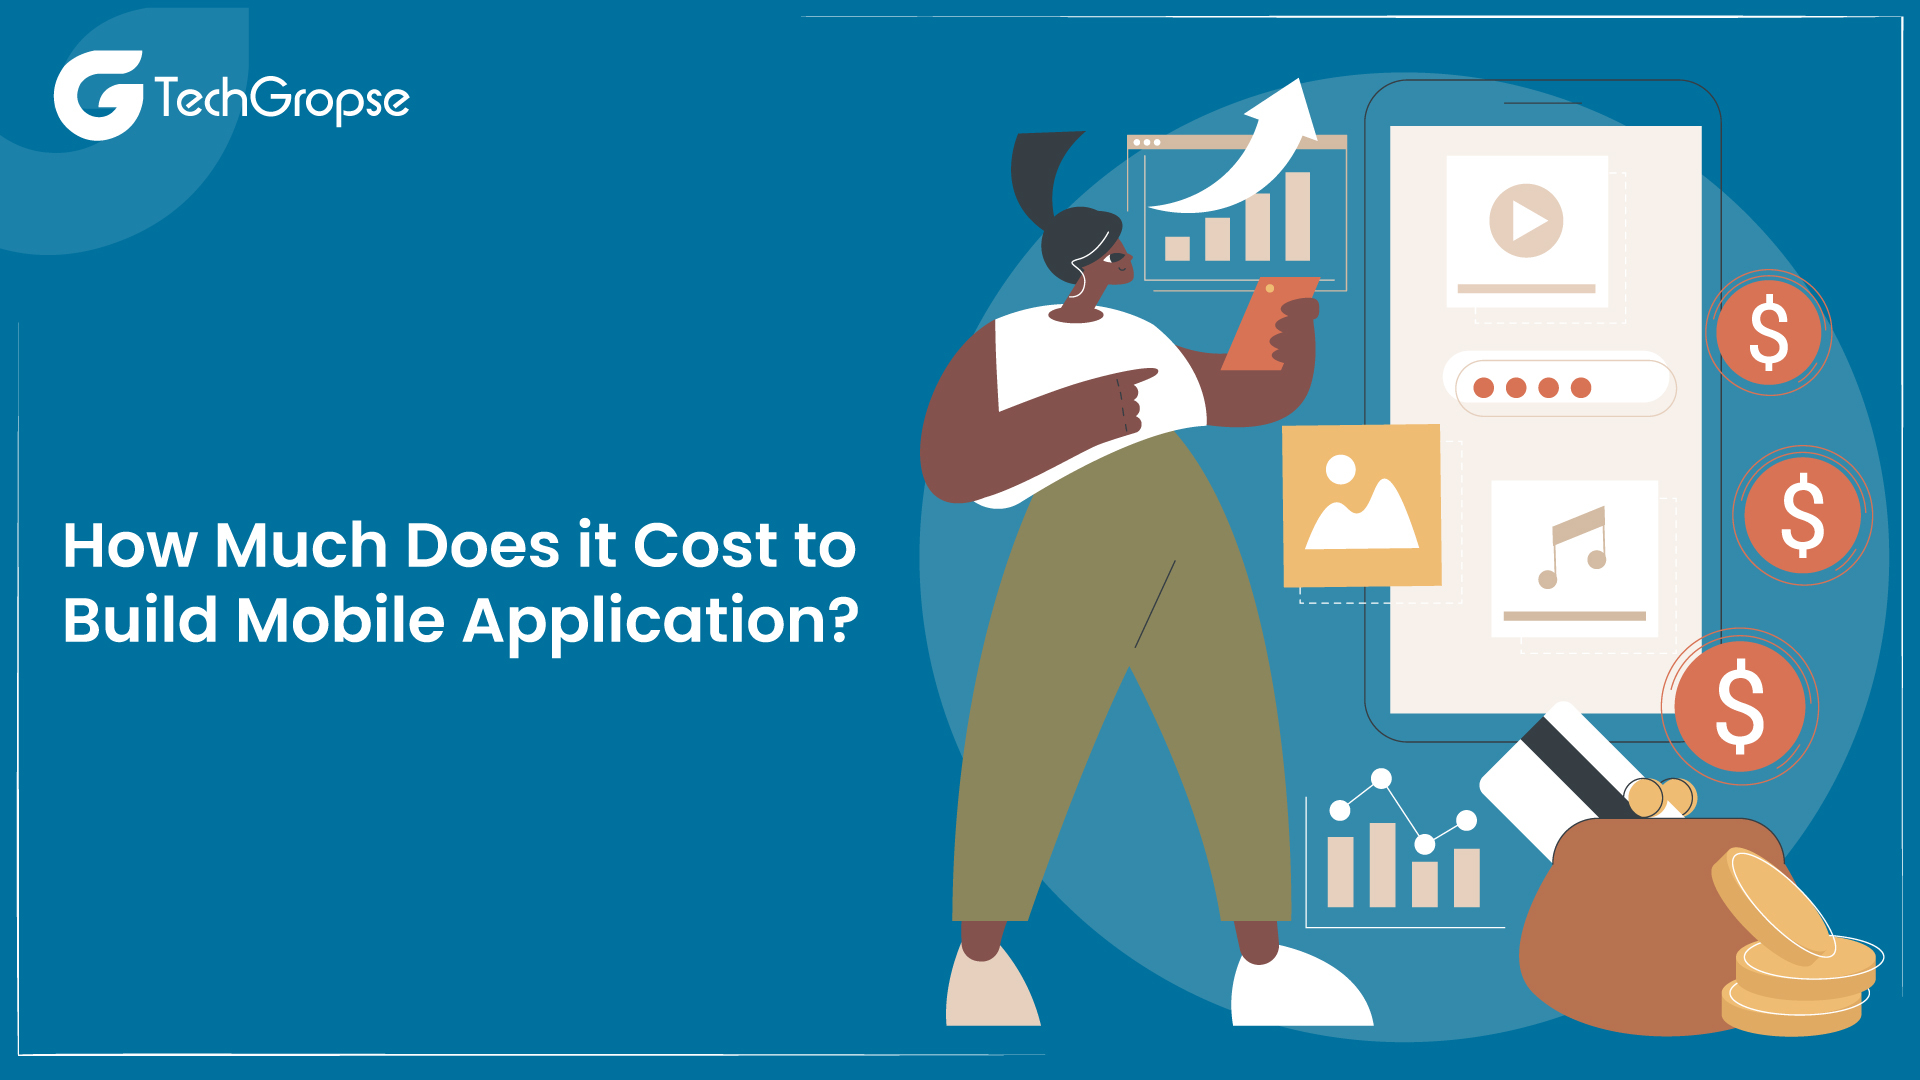 How Much Does it Cost to Build a Mobile Application?